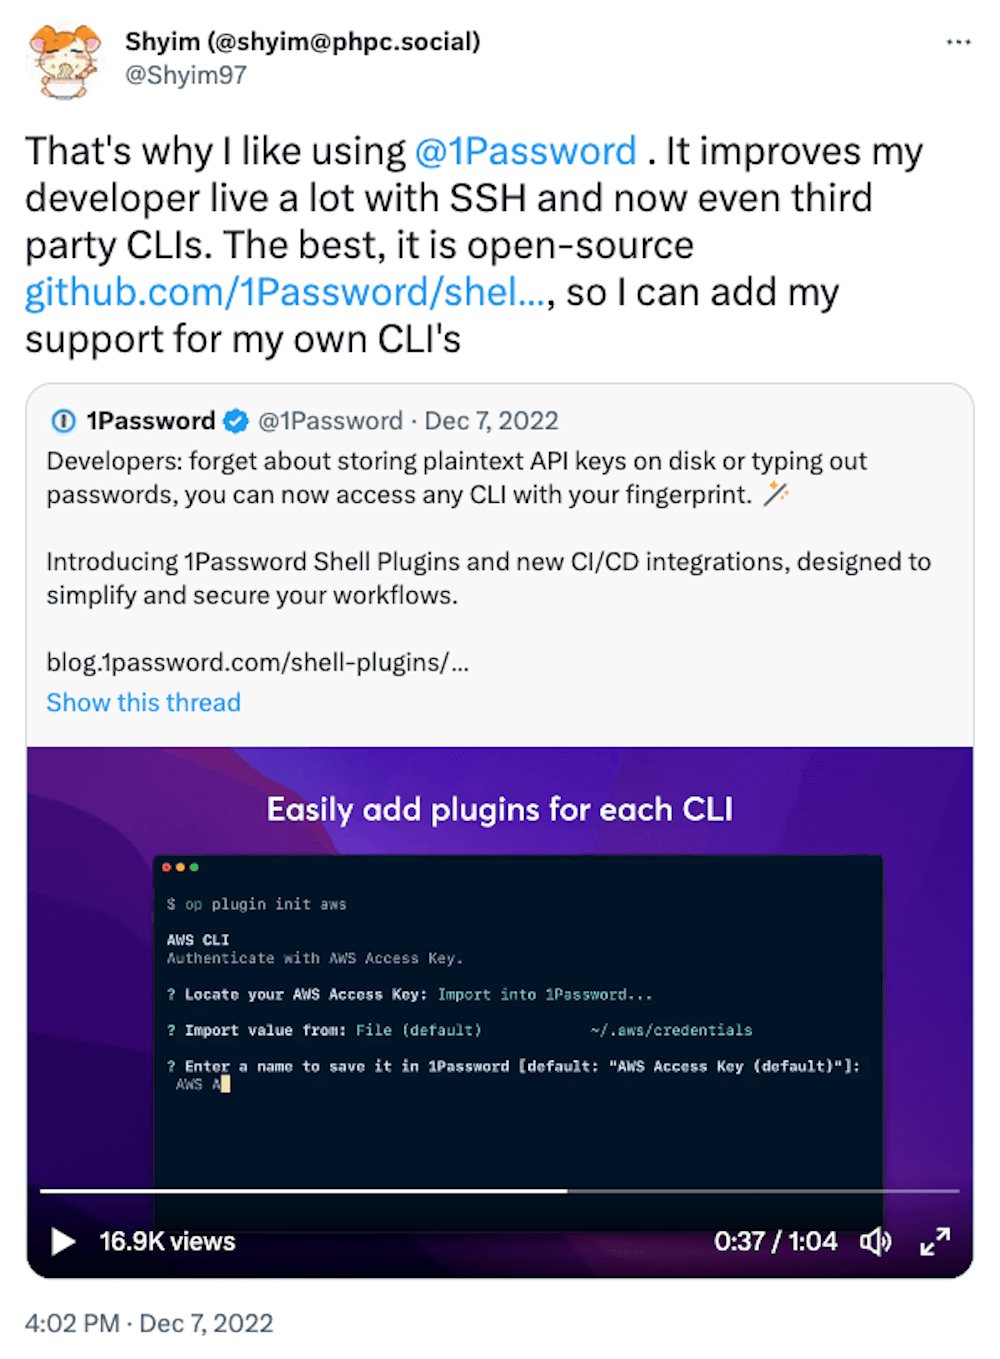 A tweet from Twitter user 'Shyim97' that reads: That's why I like using 1Password. It improves my developer life a lot with SSH and now even third party CLIs.